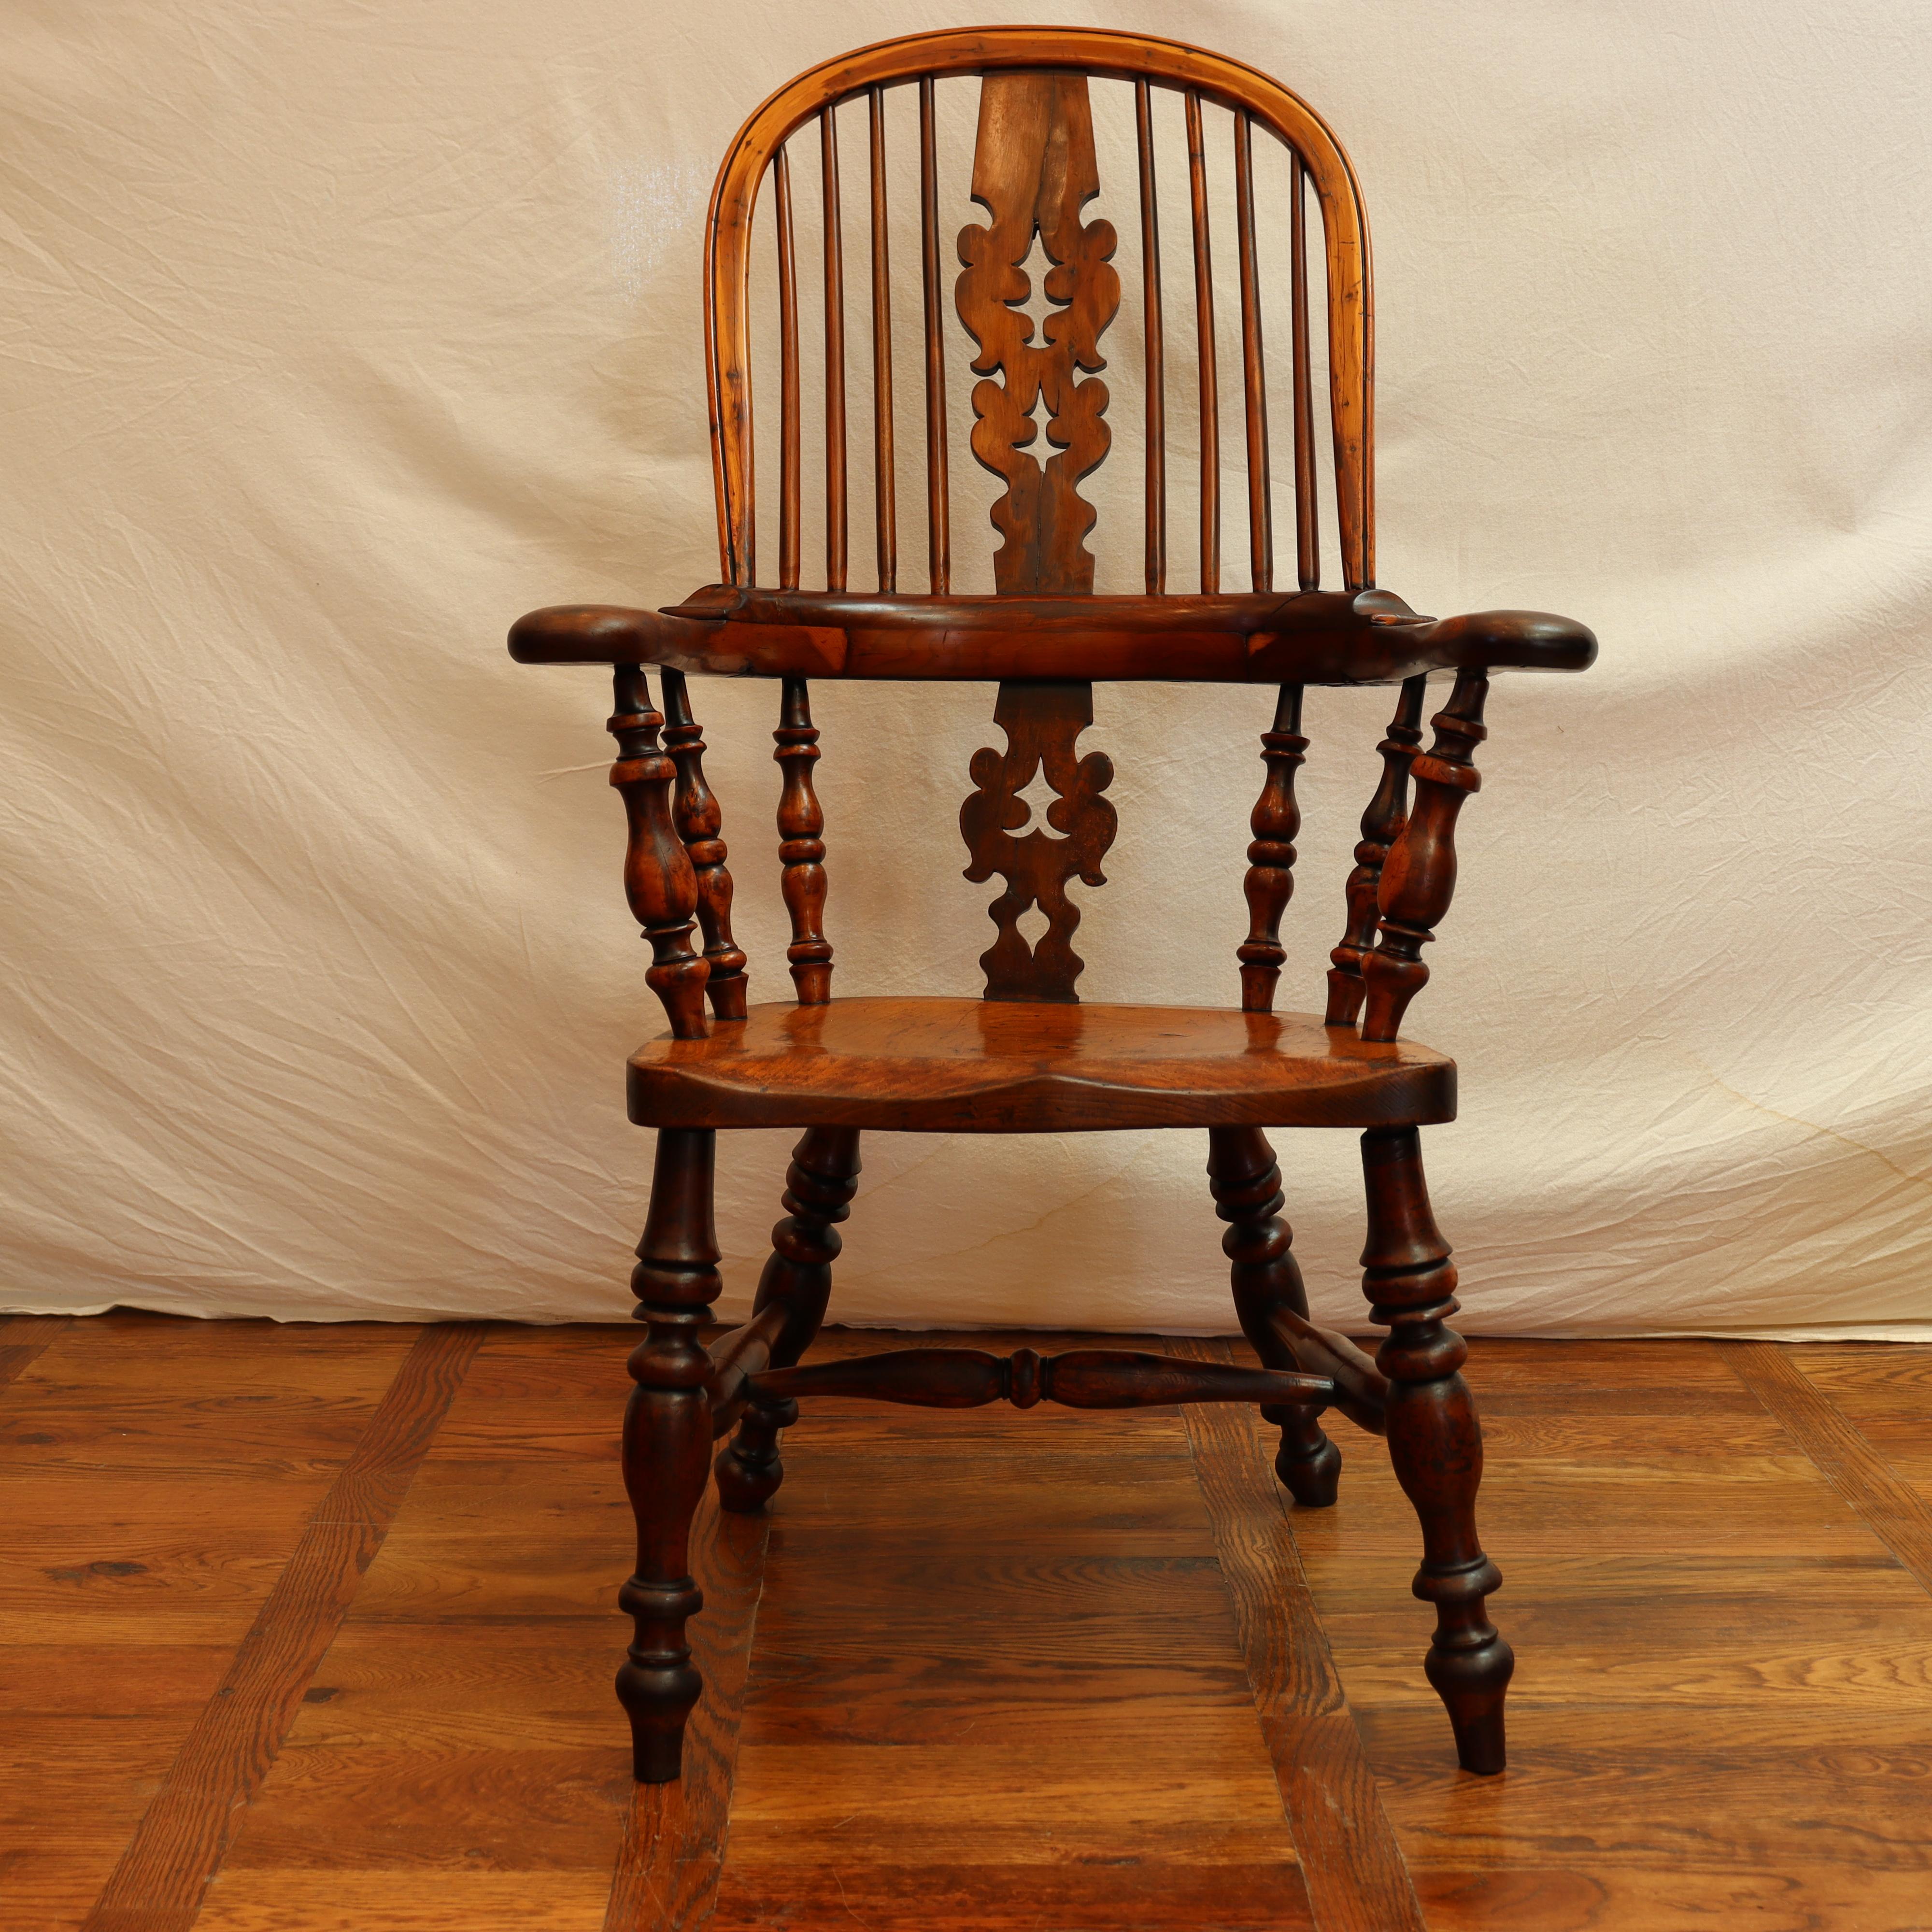 Age: 1700 - 1750

Furniture Style: English Windsor (1600 - 1725)

Overall Dimensions: Width - 25 1/2